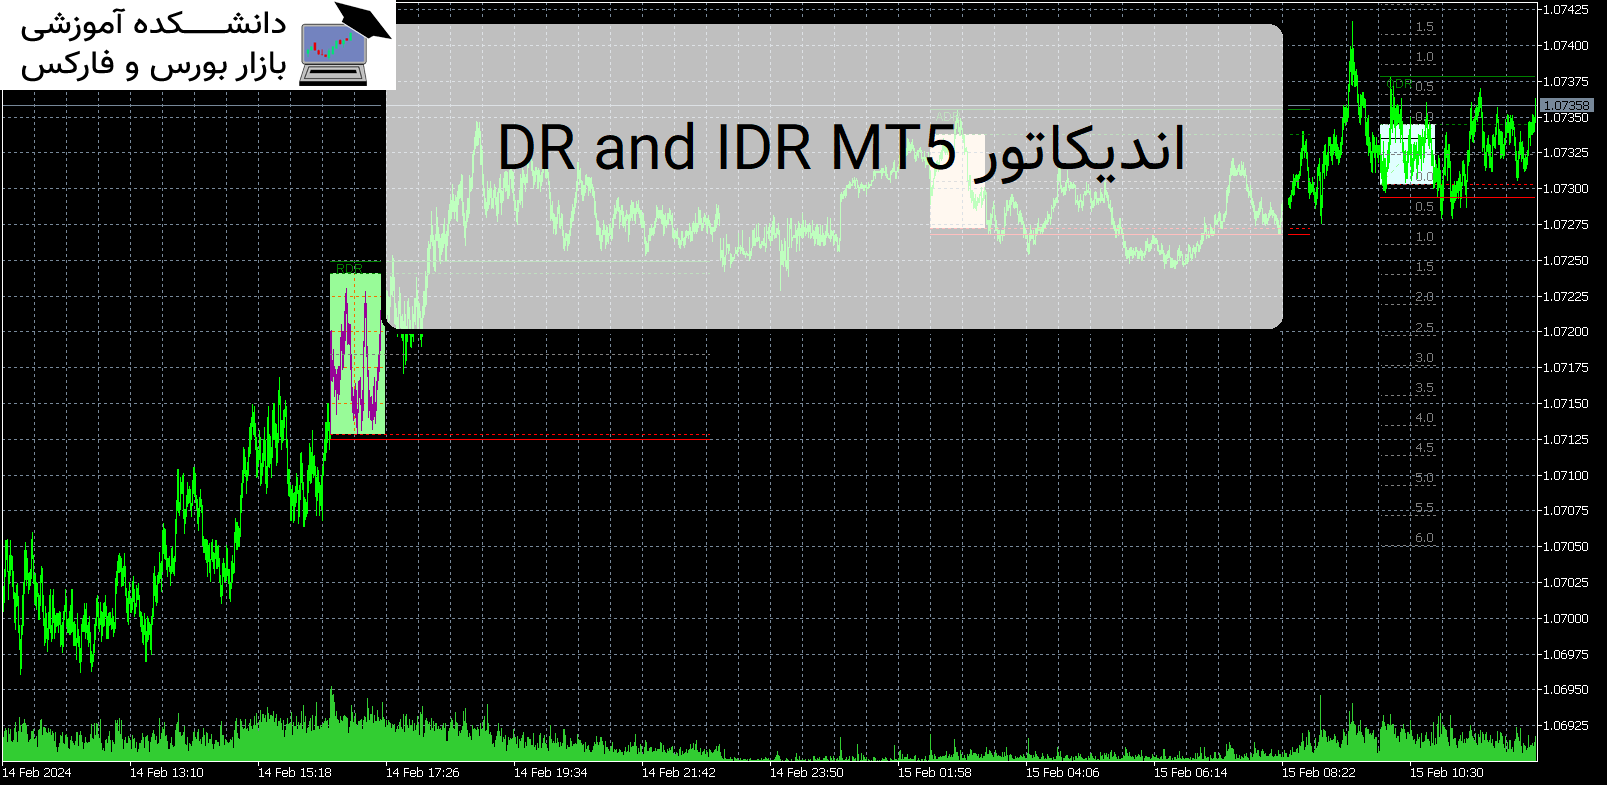 DR and IDR MT5 اندیکاتور